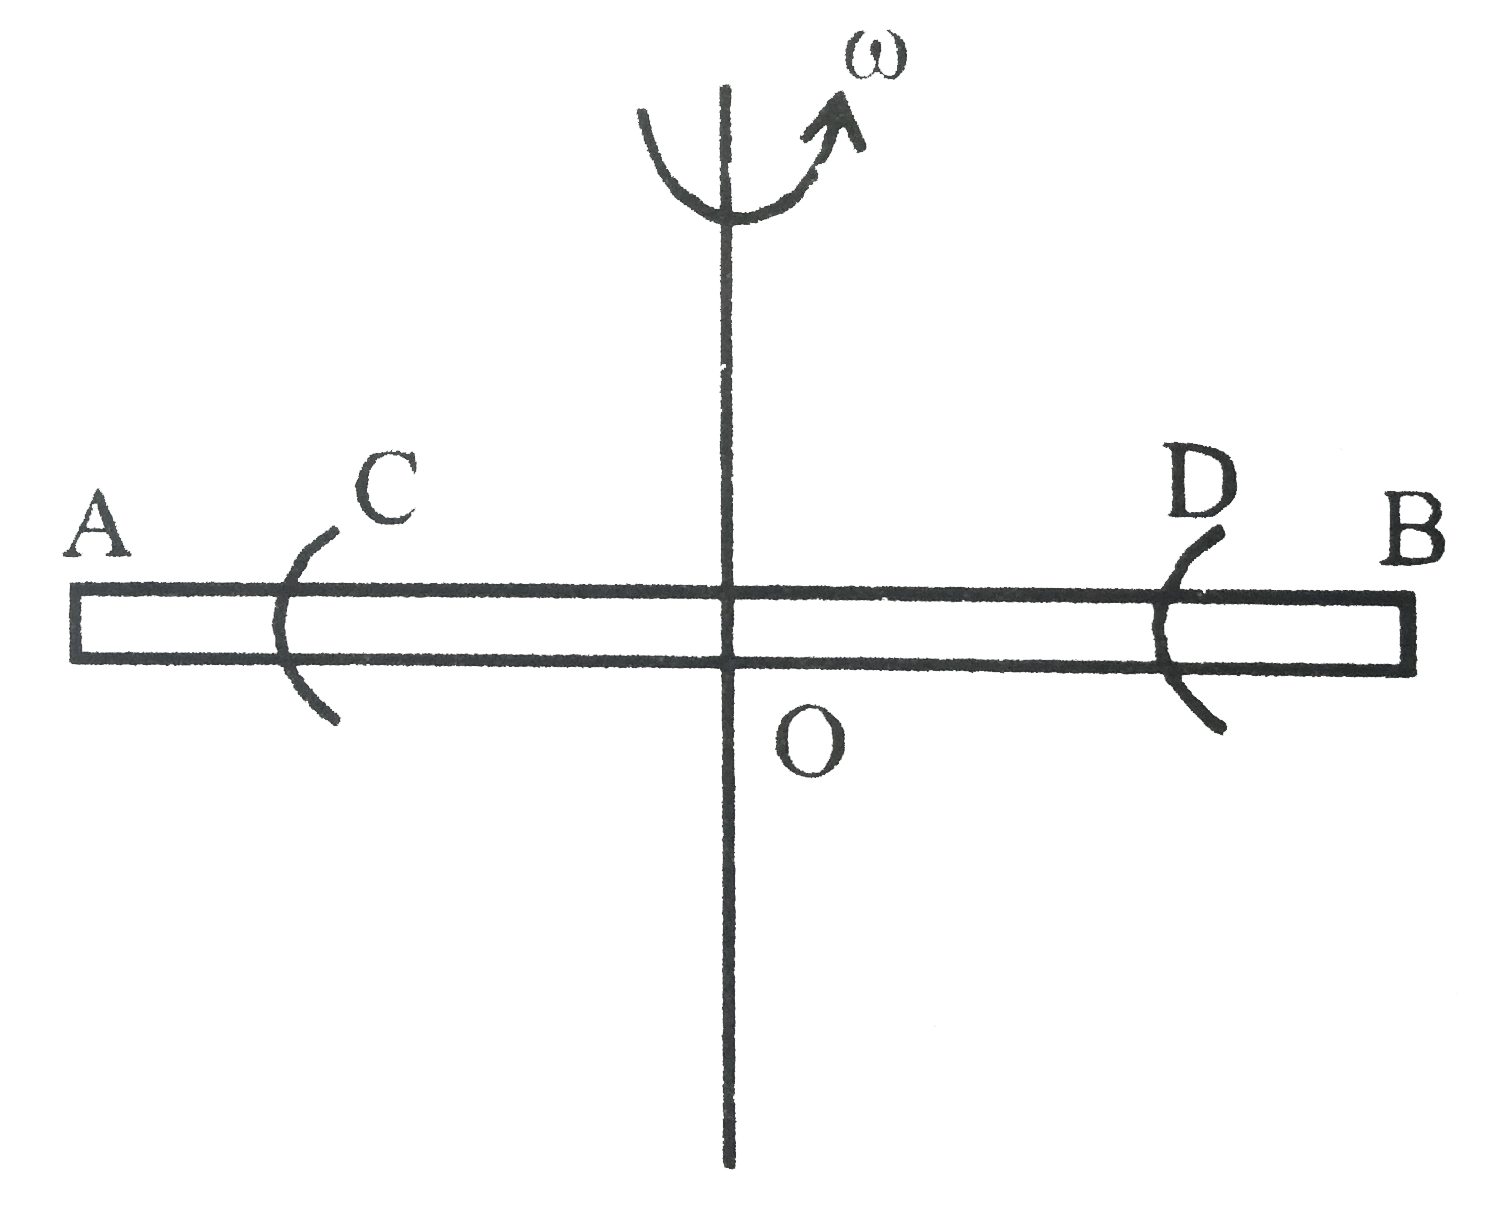 A rigid horizontal smooth rod AB of mass 0.75 kg and length 40 cm can roate freely about a fixed vertical axis through its mid point O. Two rings each of mass 1 kg are initially at rest at a distance of 10 cm from O on either side of the rod. The rod is set in rotatiob with an angular velocity of 30 radians per second. Find the velocity of each ring along the length of the rod in m//s when they reach the ends of the rod.   .